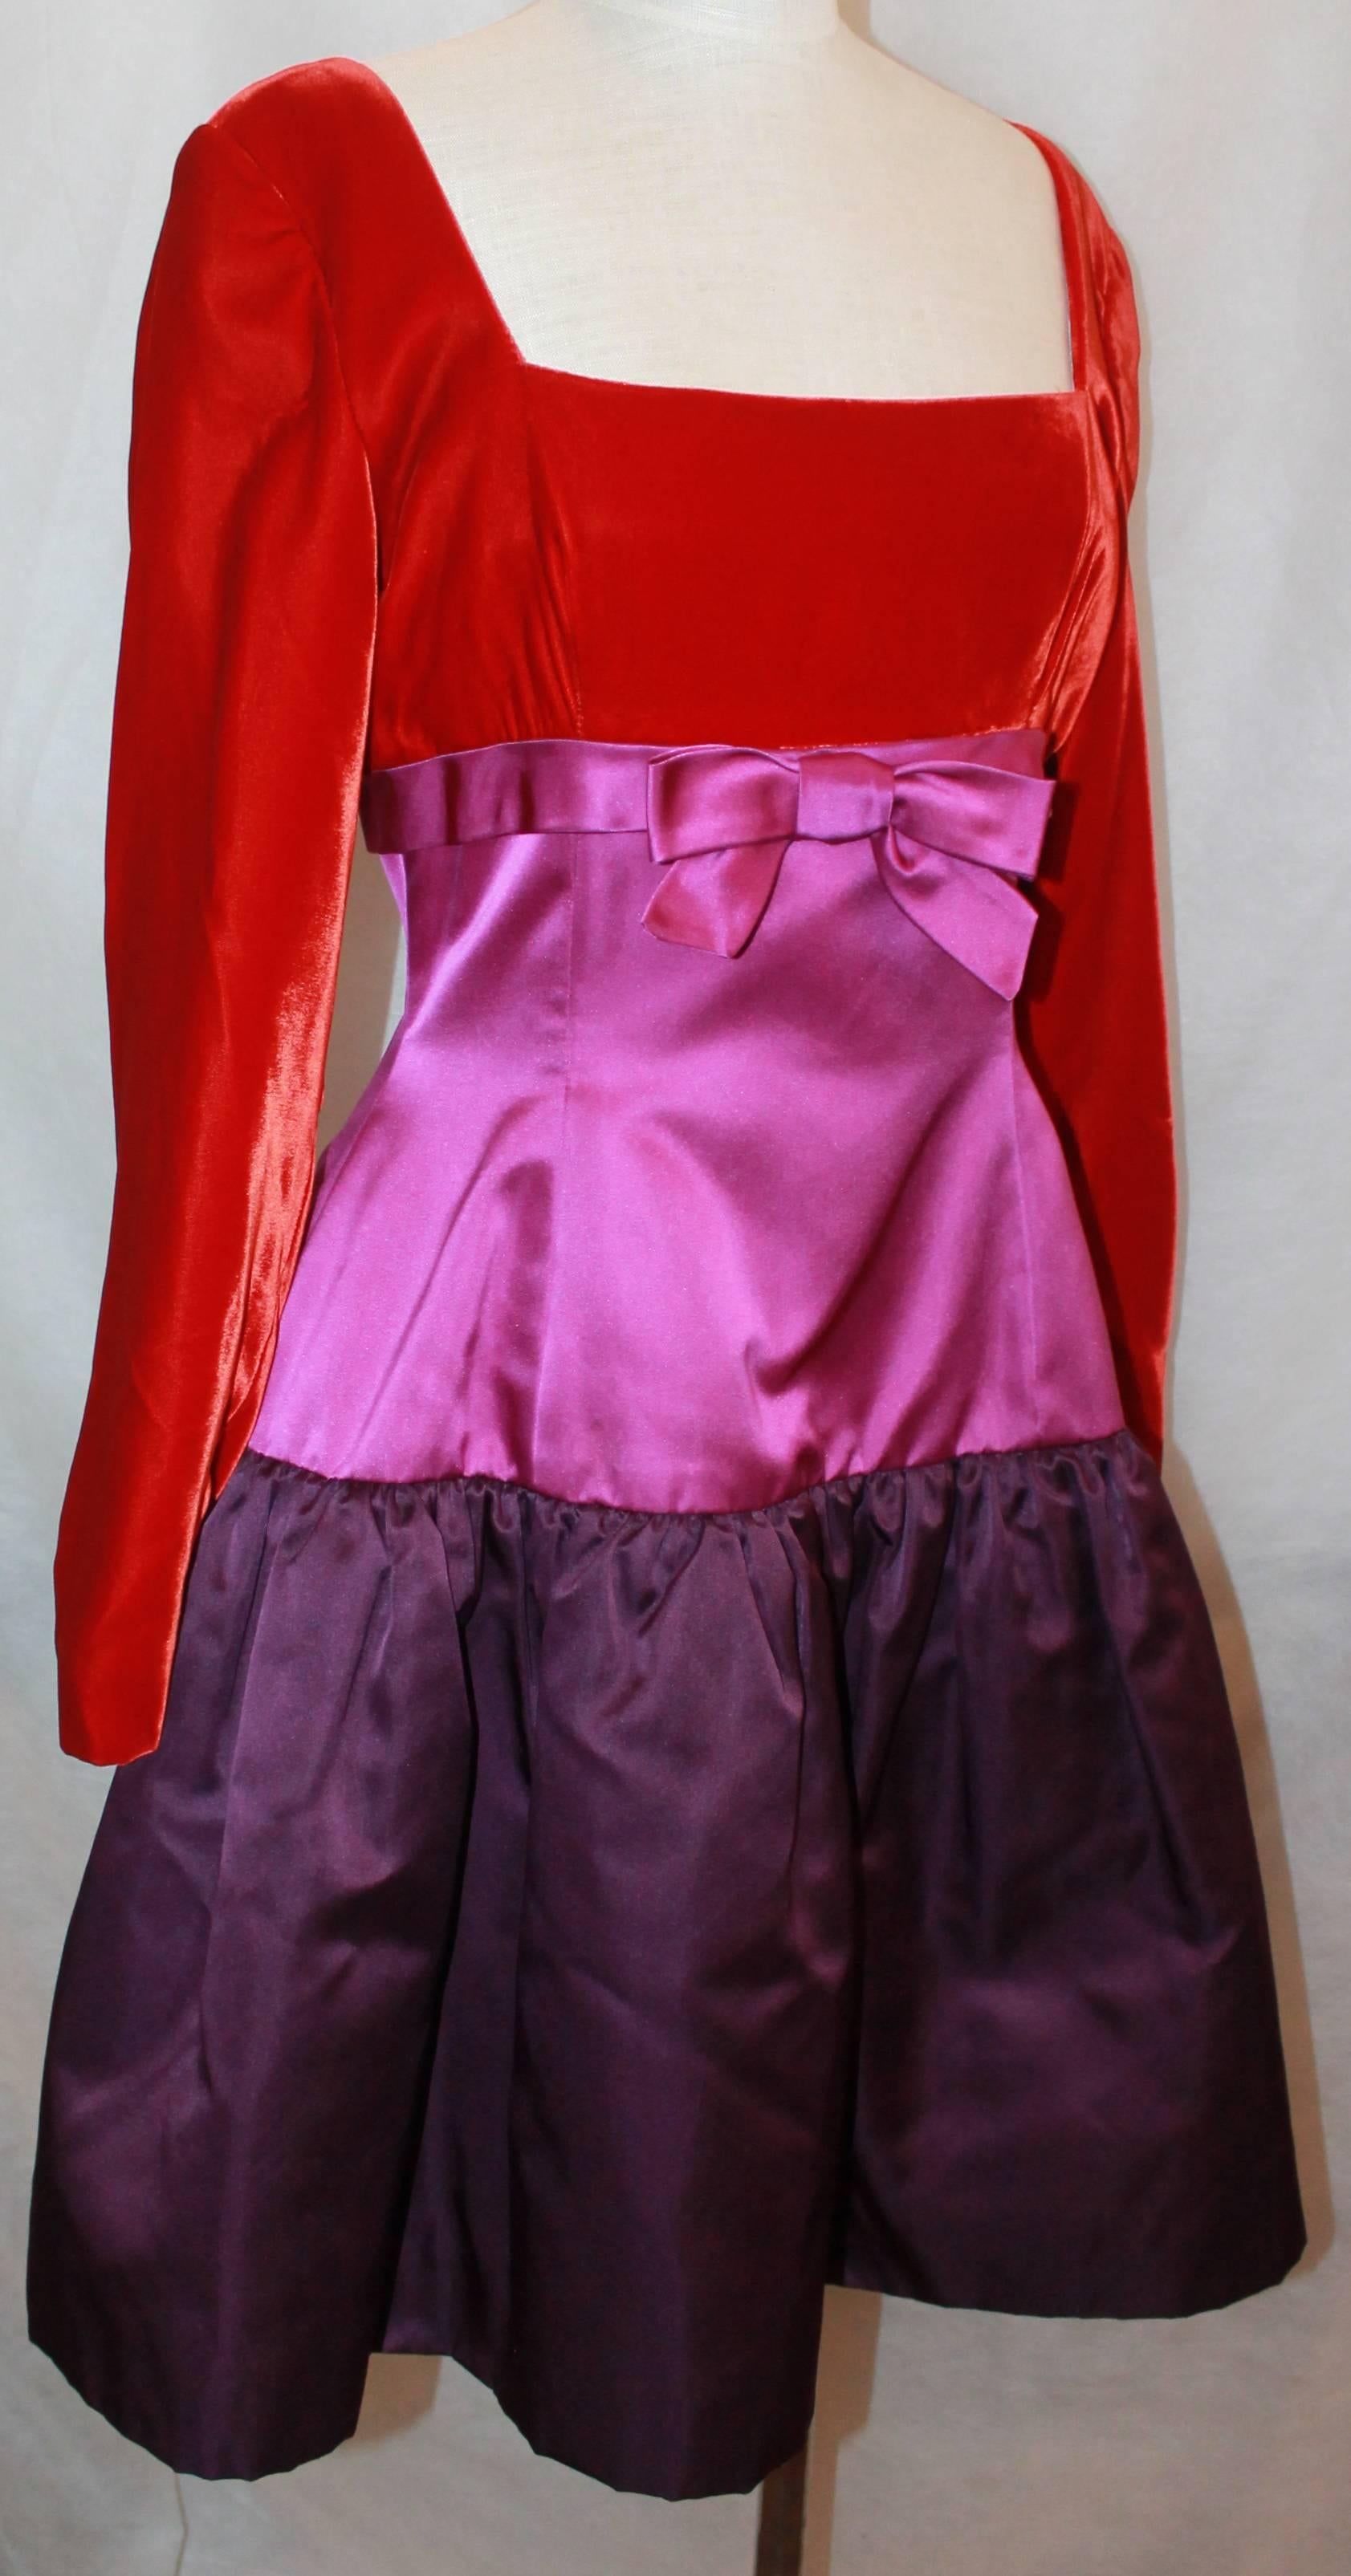 Oscar de la Renta 1990's Red & Purple Color-Block Dress - 8. This dress is in excellent condition and is long sleeved. The top part is velvet and the middle & bottom part is satin. The colors are red, fuchsia, and purple. 

Measurements:
